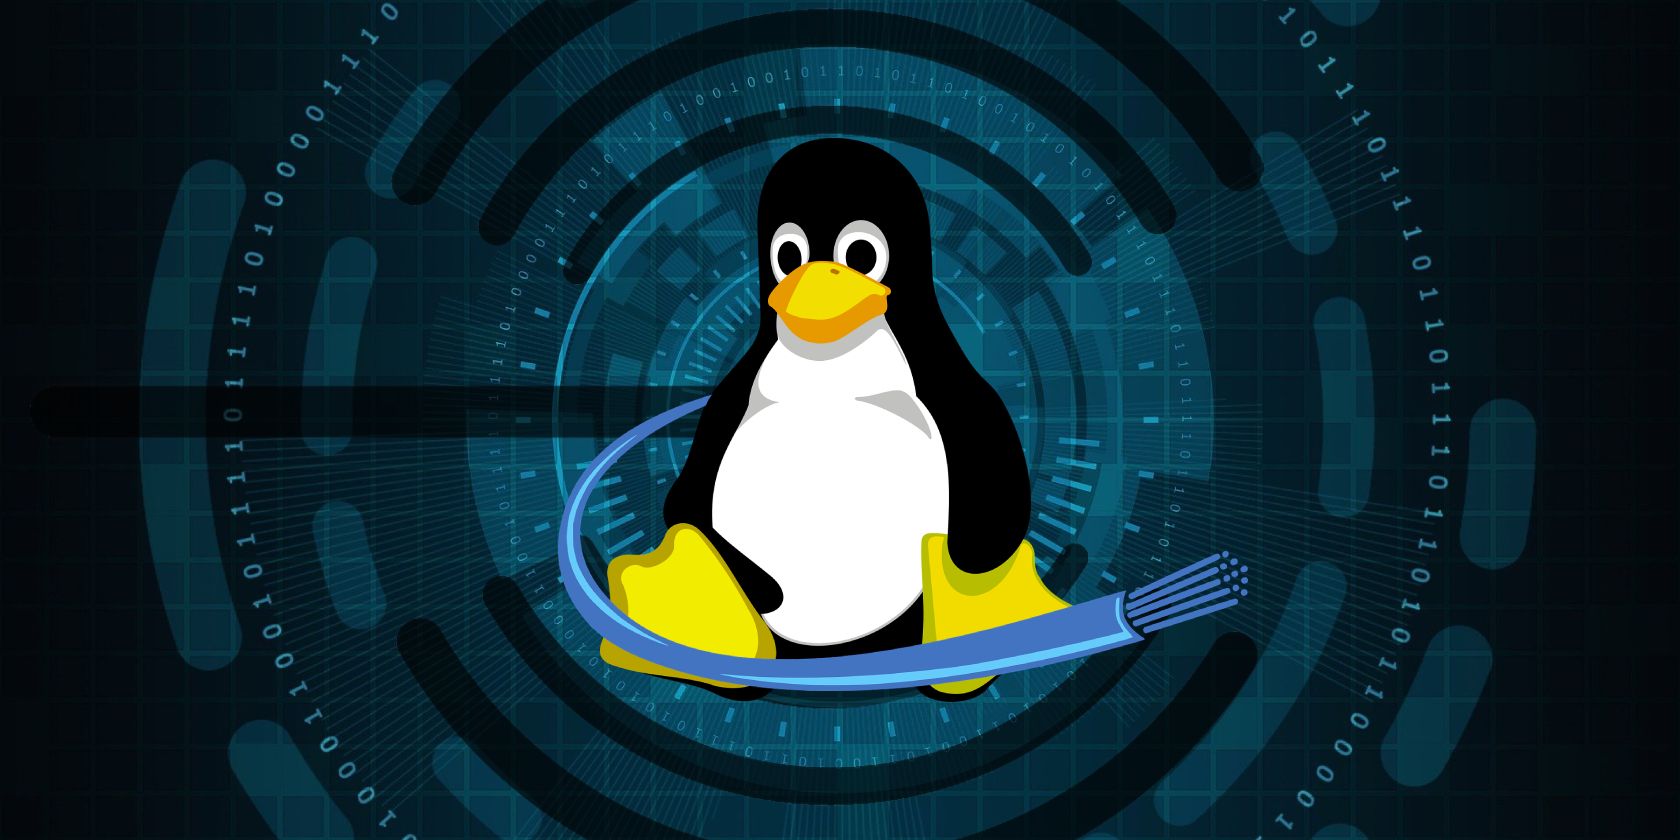 How to Change Your MAC Address on Linux